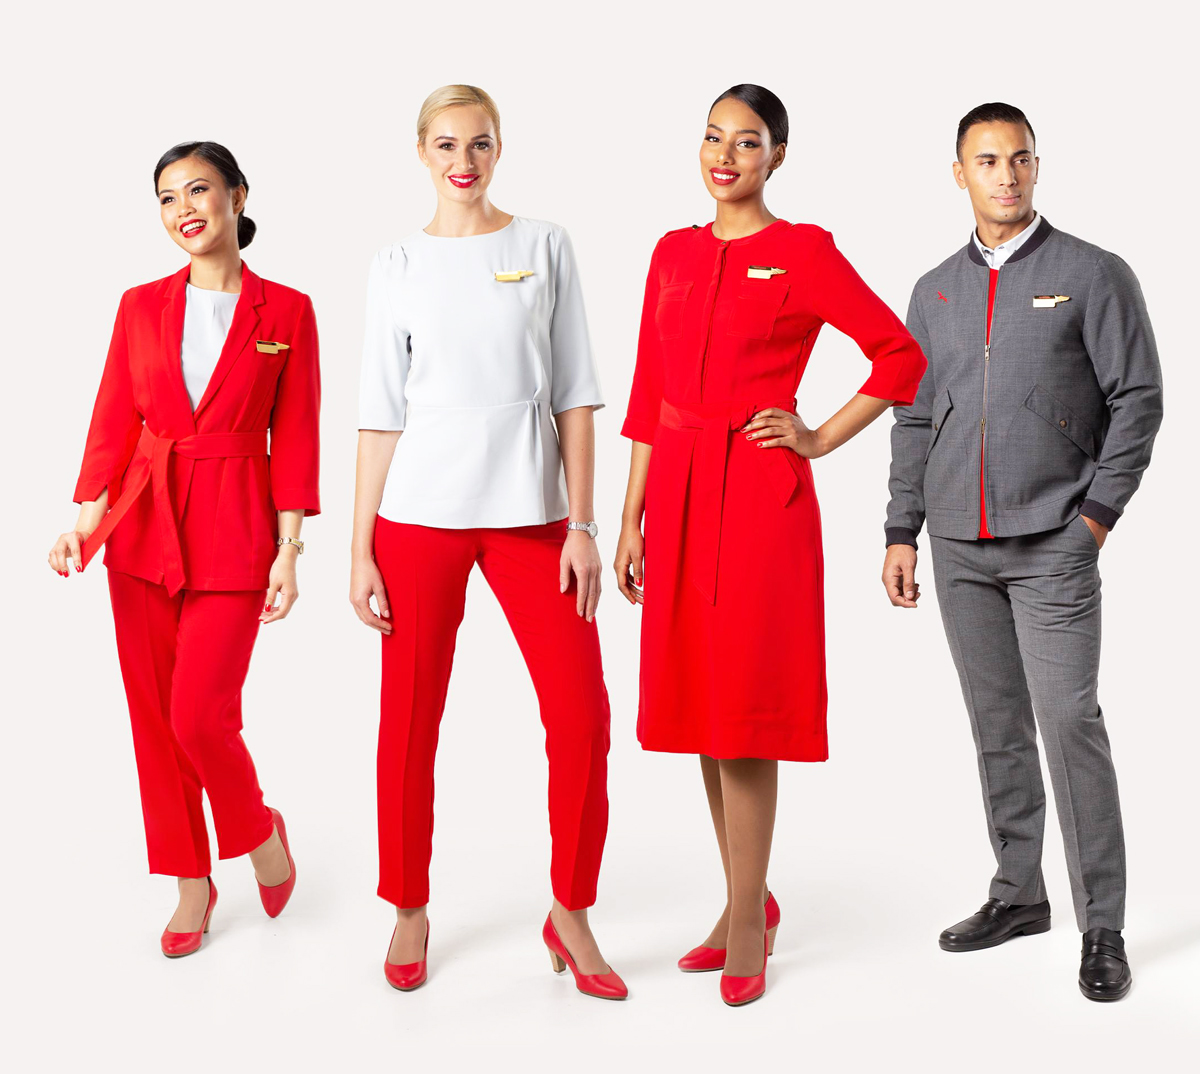 Air Arabia is looking for Cabin Crew